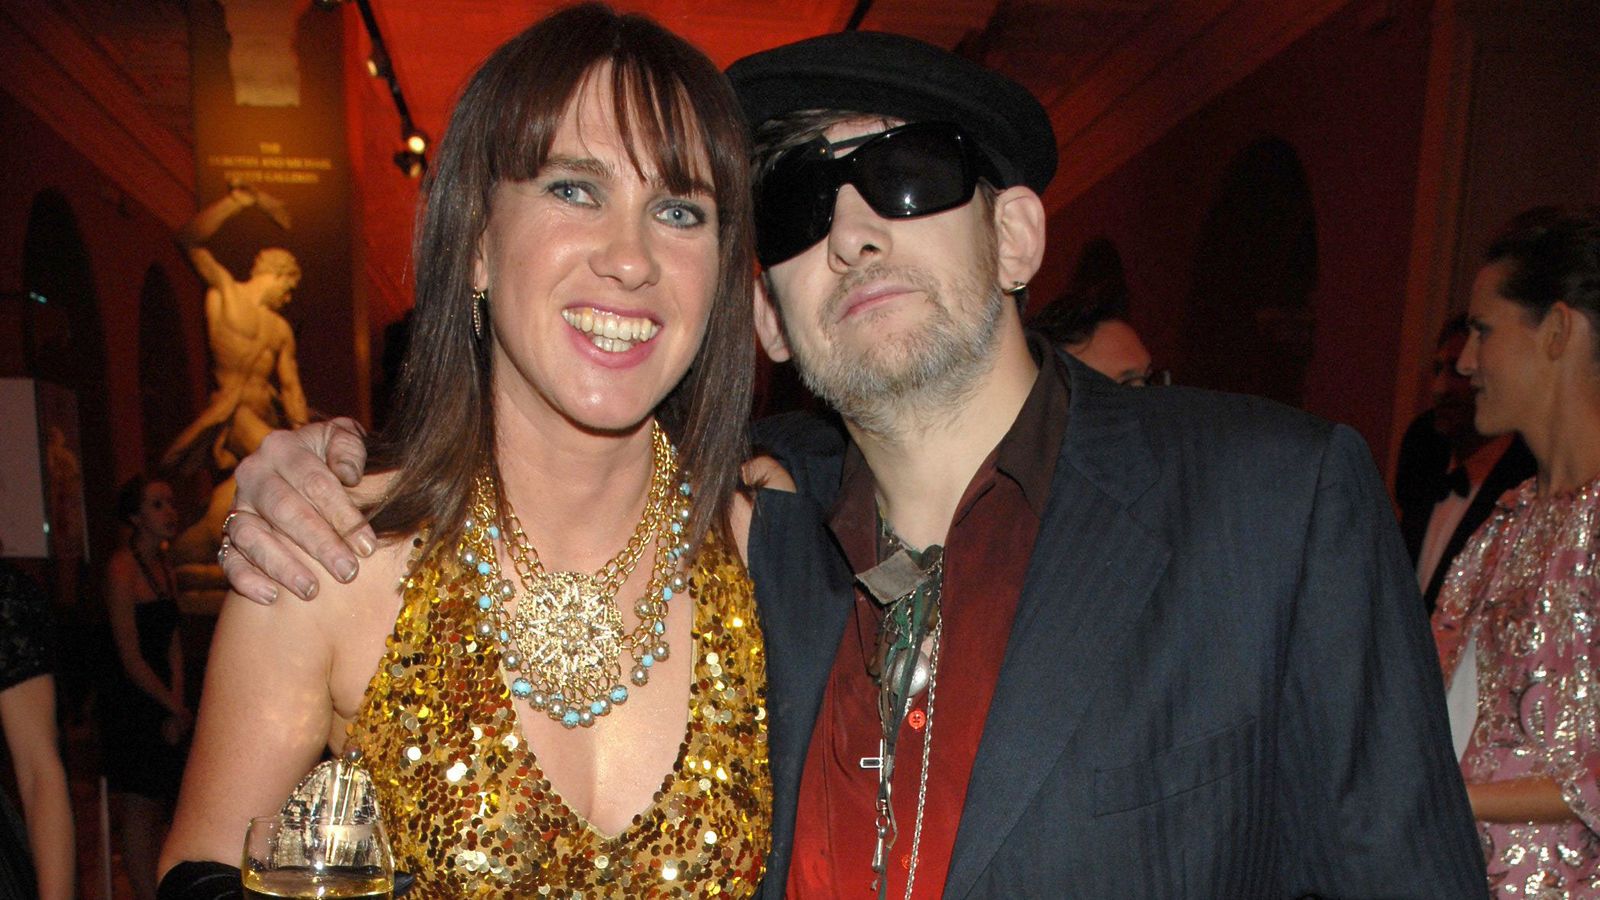 Shane MacGowan's wife says singer was 'determined to live only a few days ago'